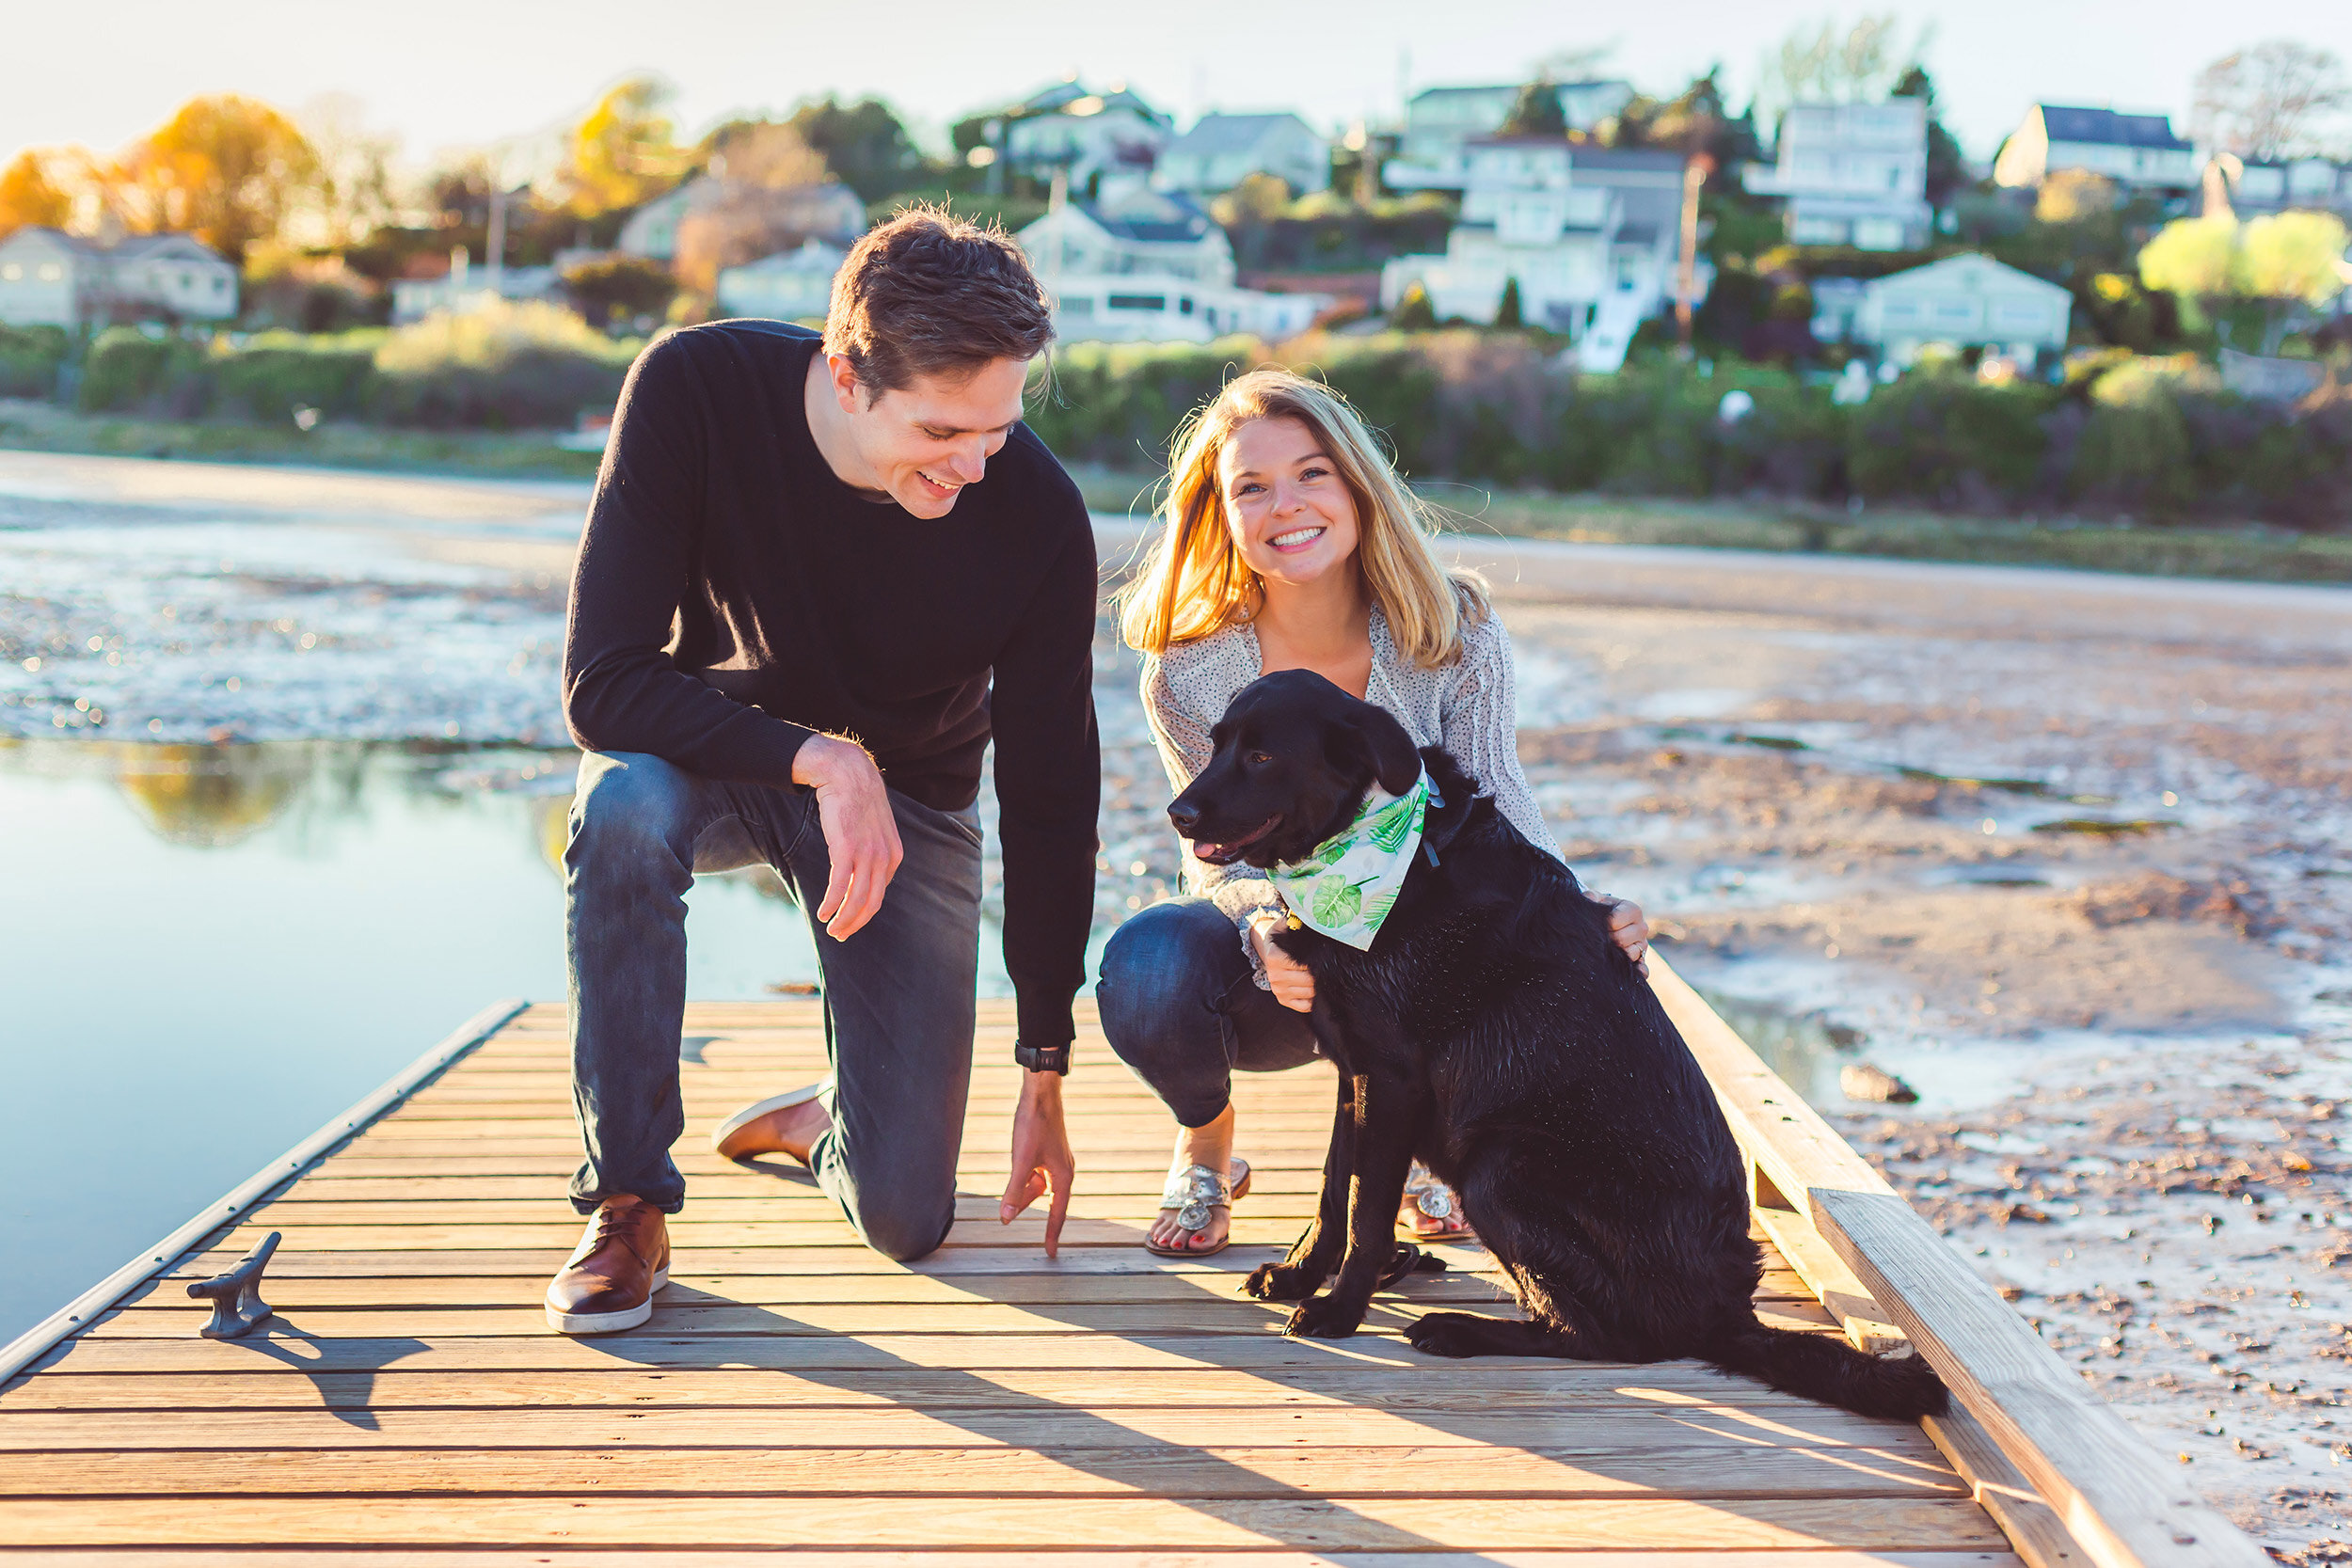 Little Neck Ipswich Engagement Session | Stephen Grant Photography